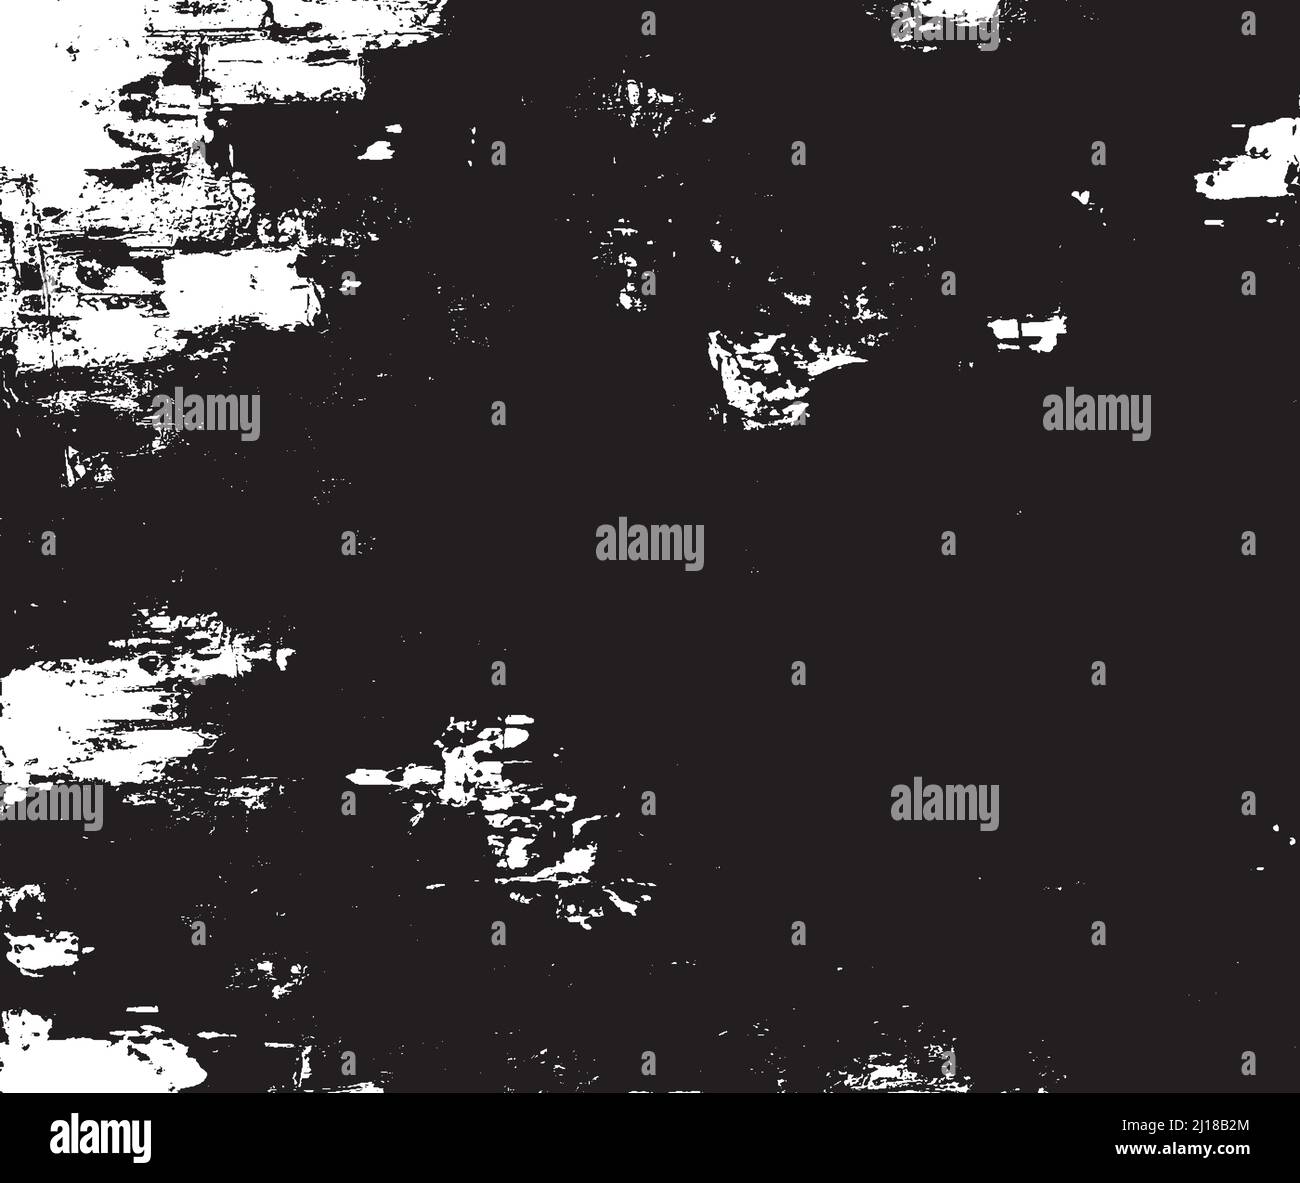 Grunge Black And White Urban Vector Texture Template Stock Vector Image ...